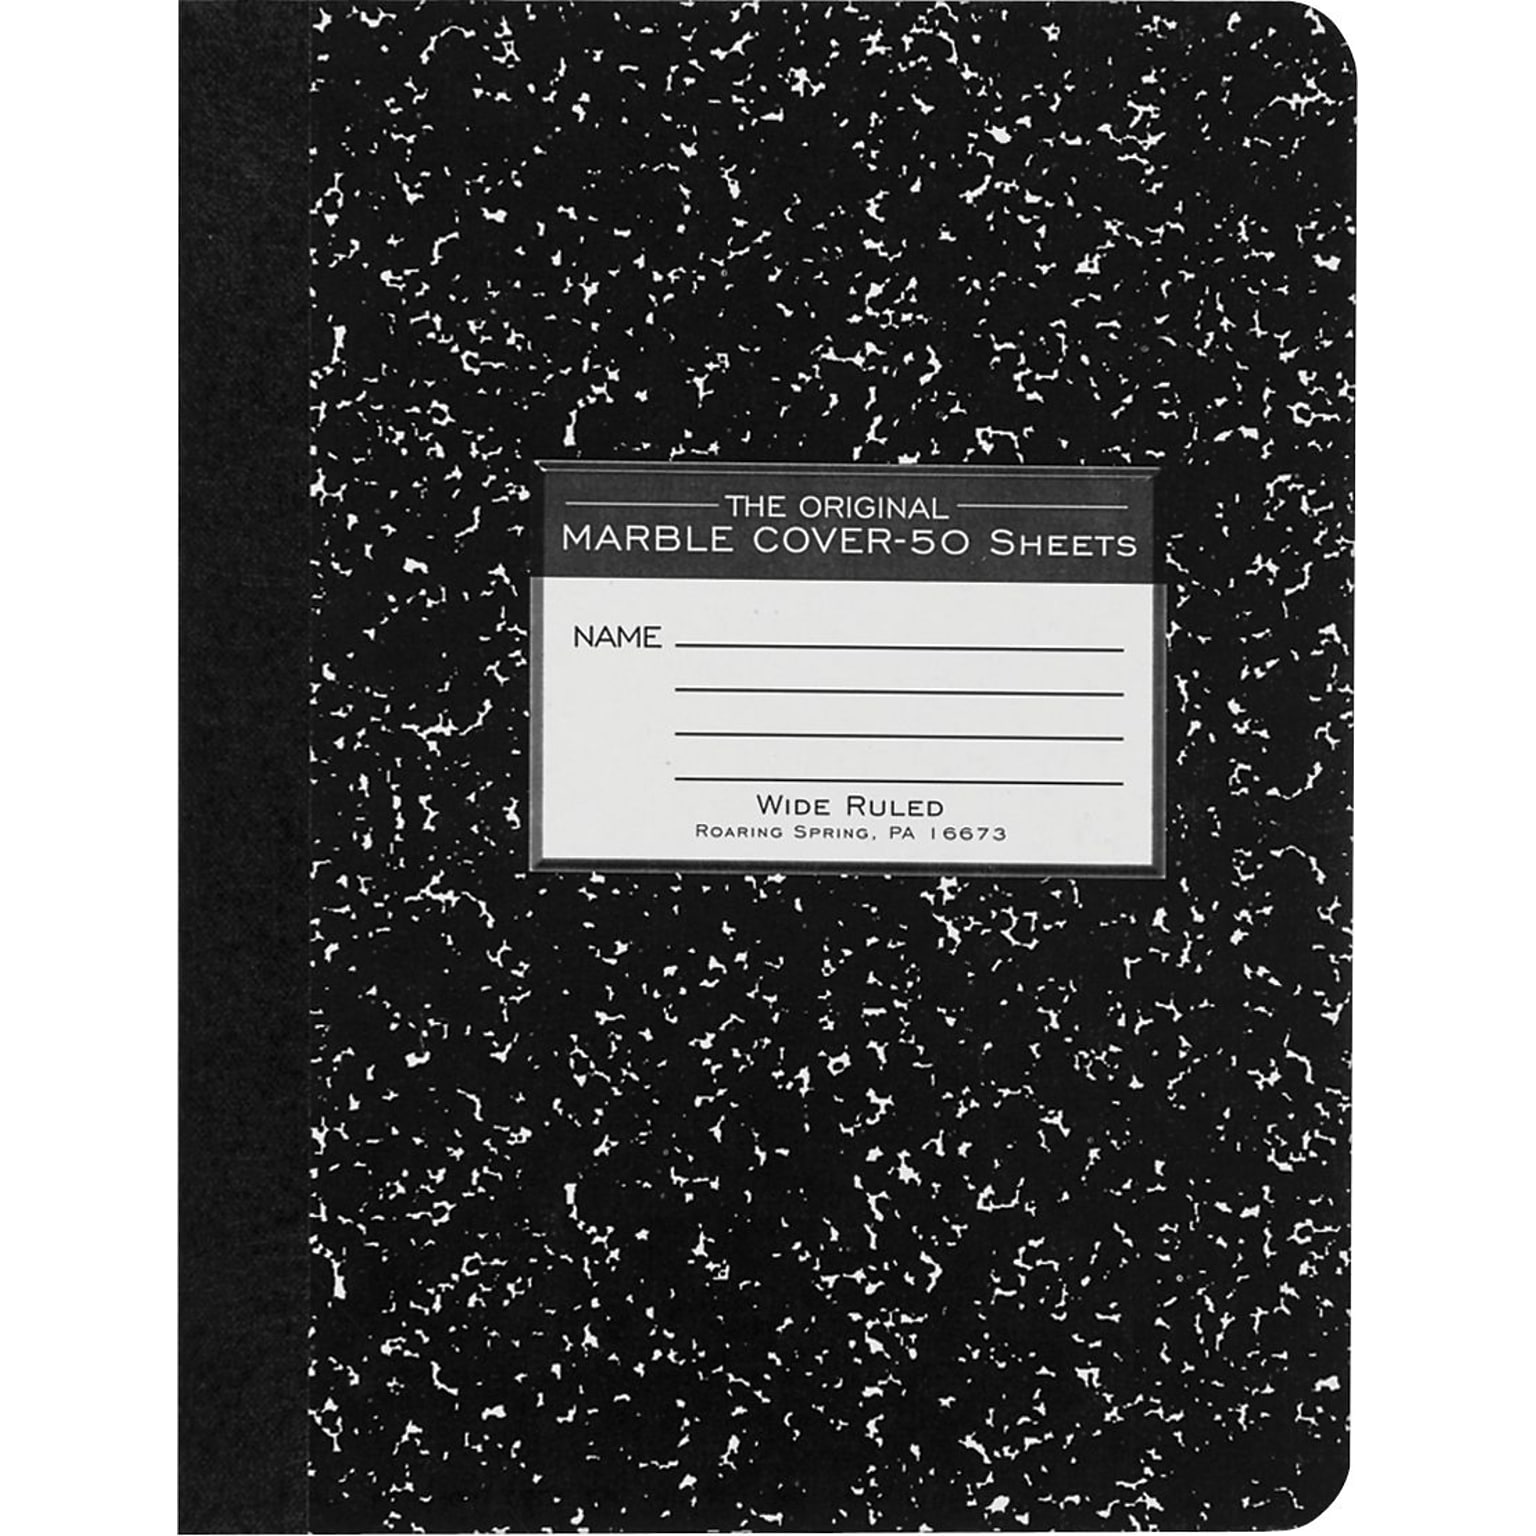 Roaring Spring Paper Products Composition Notebooks, 9.75 x 7.5, Wide Ruled, 50 Sheets, Black (77220)